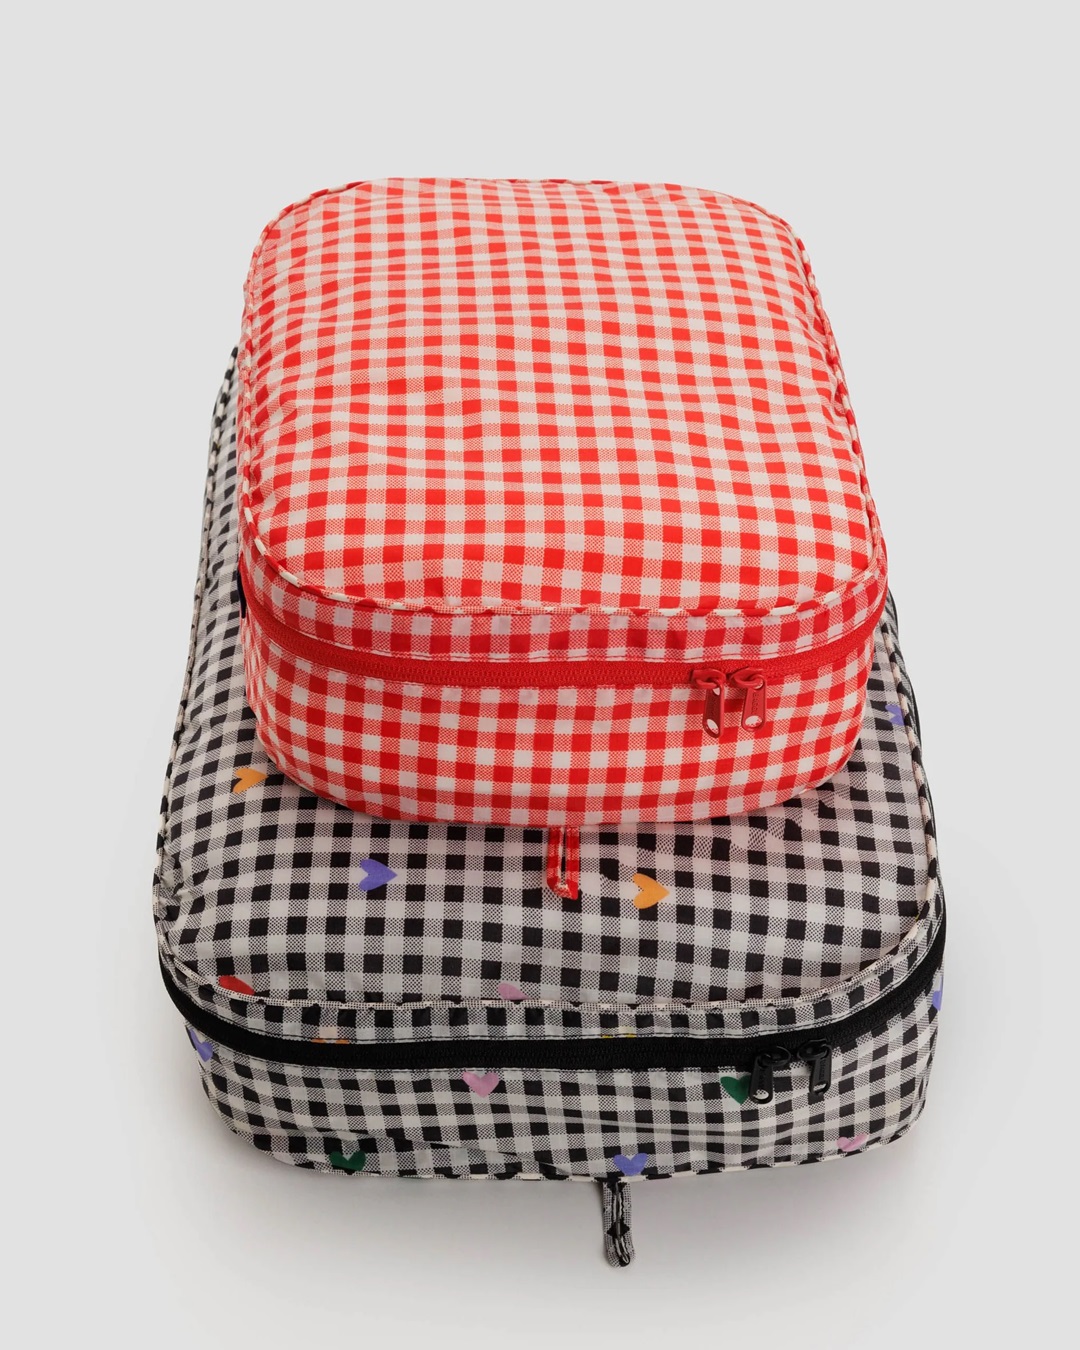 Black and red gingham packing cubes